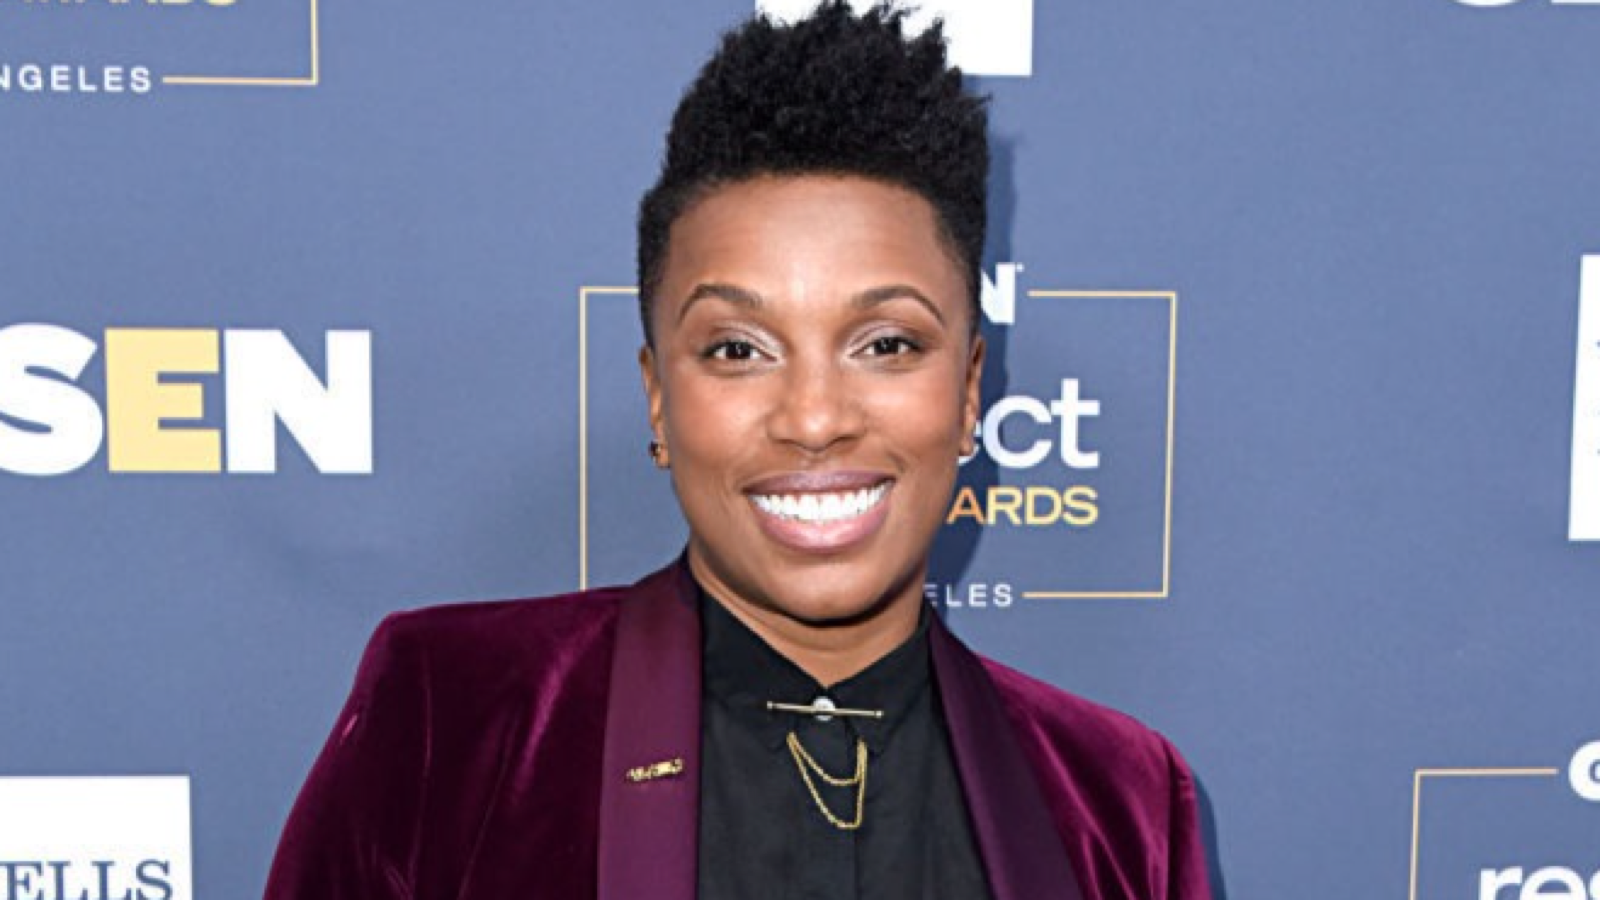 BEVERLY HILLS, CALIFORNIA - OCTOBER 25: Glsen Deputy Executive Director, Melanie Willingham-Jaggers attends the GLSEN Respect Awards Los Angeles at the Beverly Wilshire Four Seasons Hotel on October 25, 2019 in Beverly Hills, California. (Photo by Vivien Killilea/Getty Images)